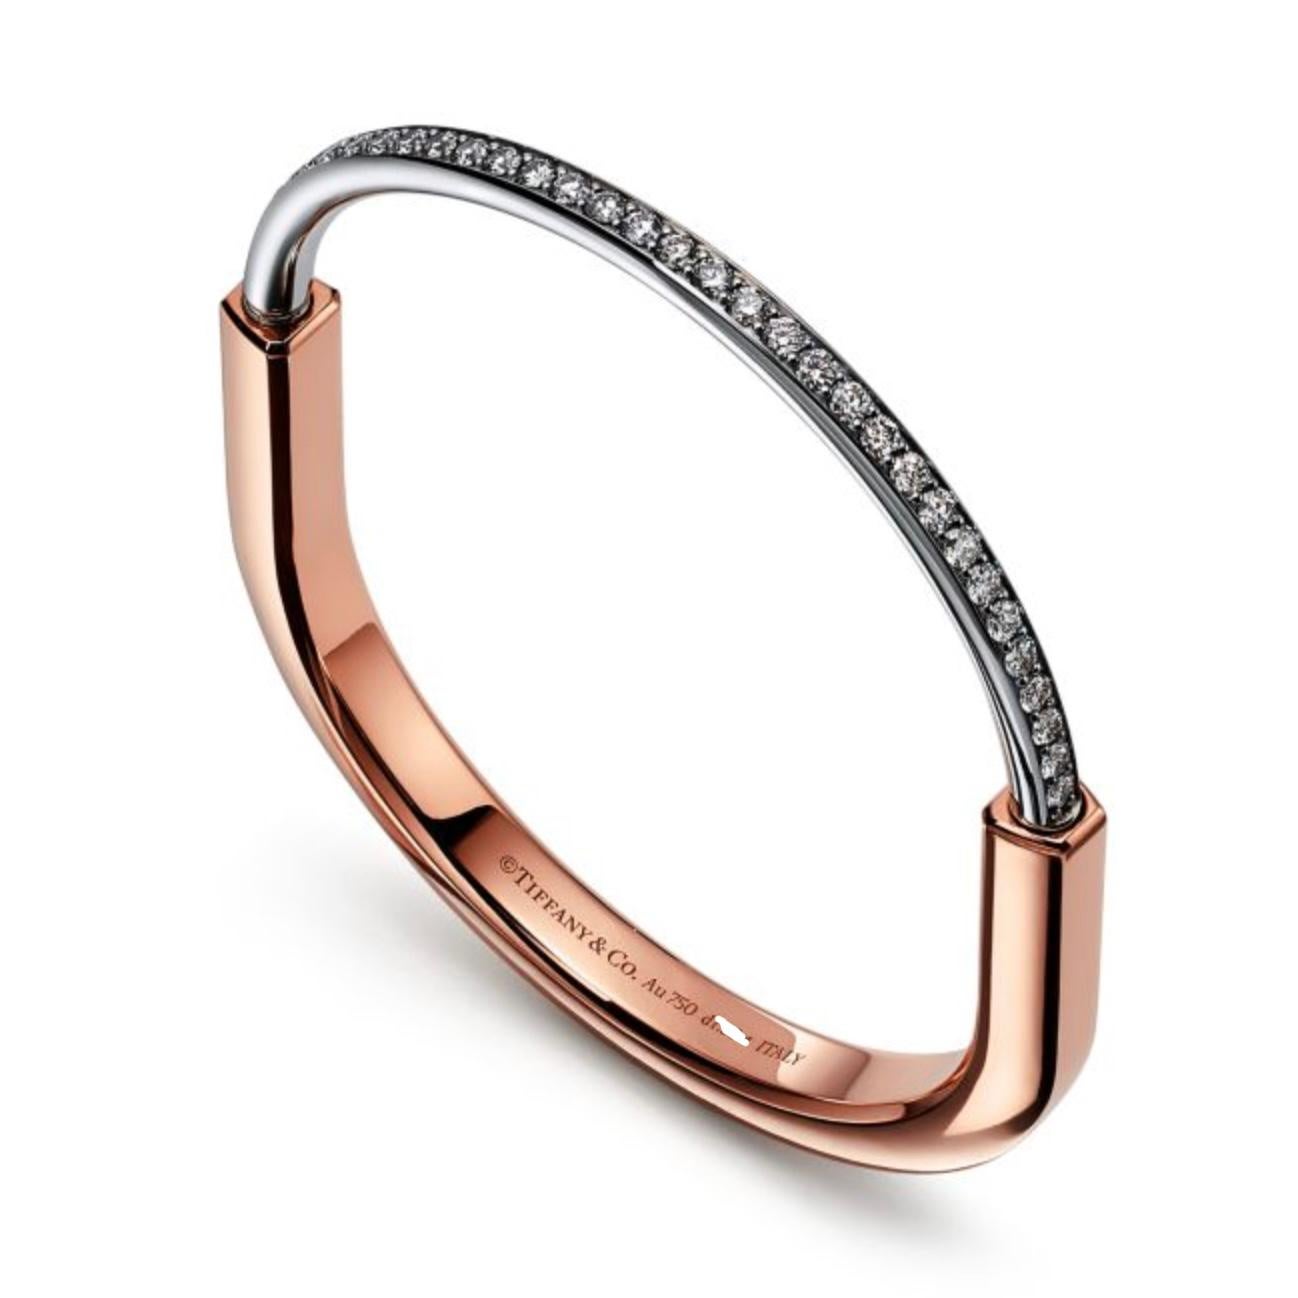  Designer: Tiffany & Co.
Collection: Tiffany Lock
Model Number: 70158329
Style: Bangle Bracelet
Metal: Rose and White Gold
Metal Purity: 18K
Total Carat Weight: 1.08 ct
Size: Small (fits wrists up to 5.75 in